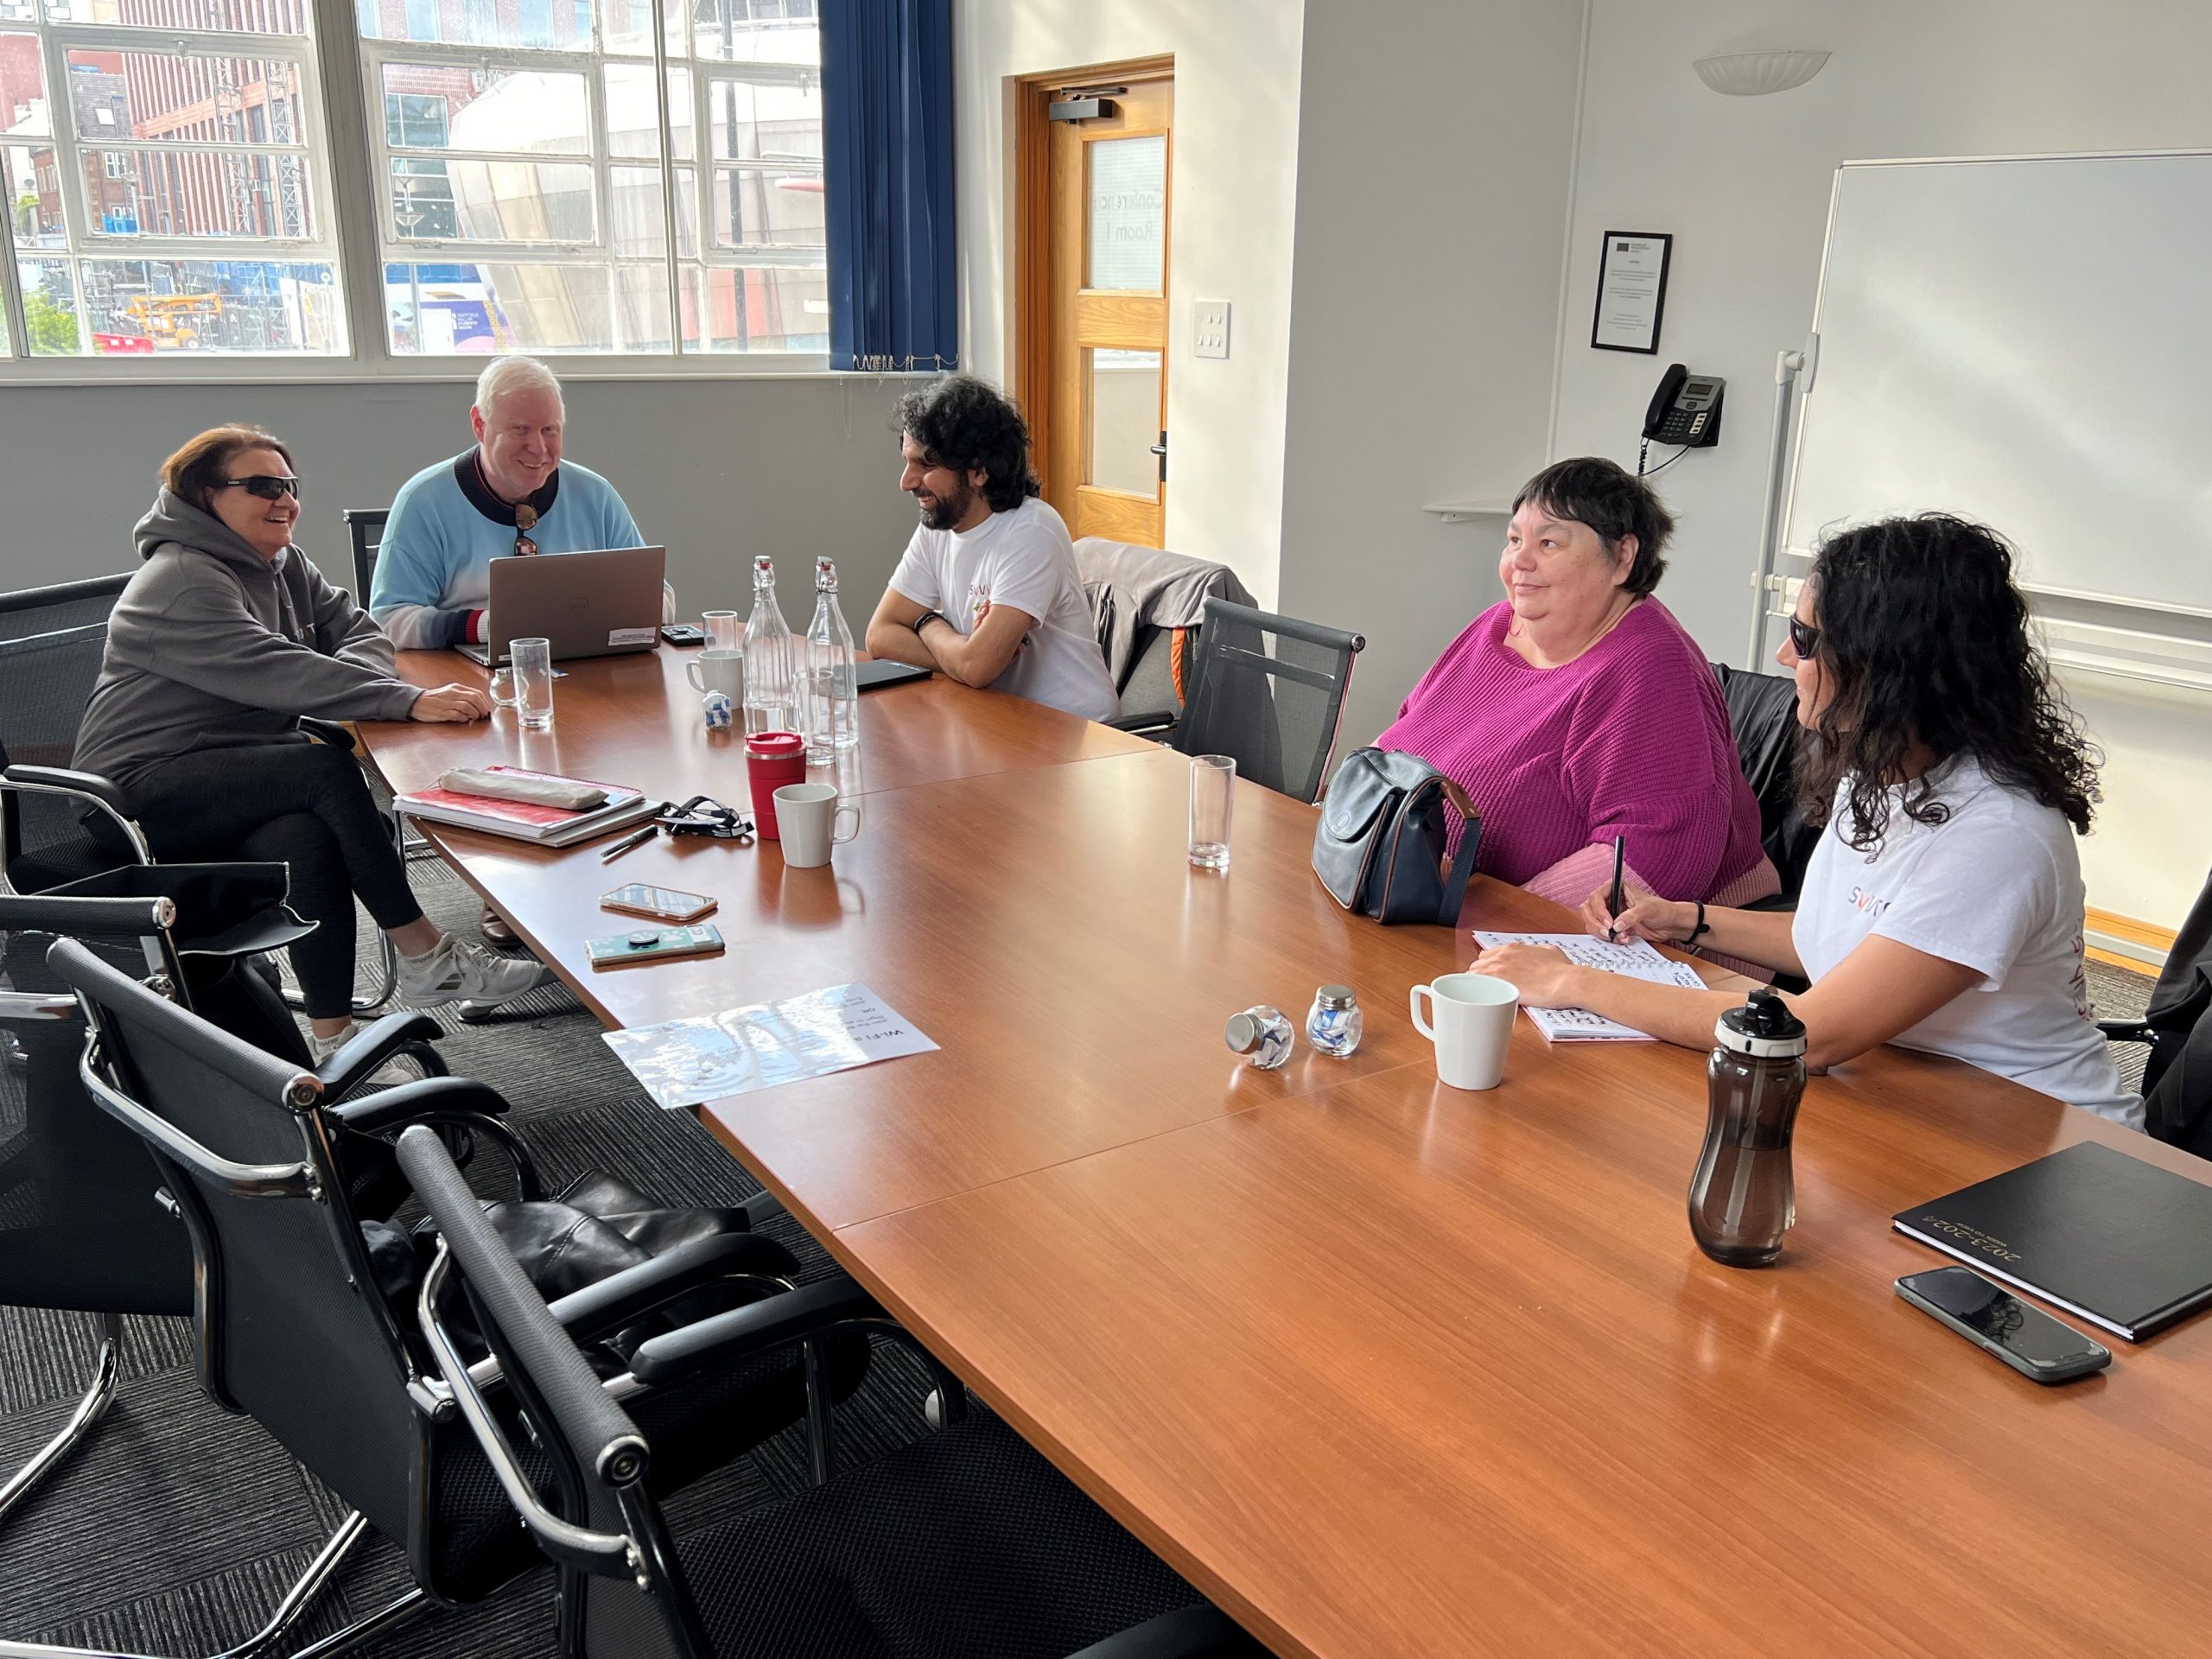 South Yorkshire SLC members sat around a board room table during their first face-to-face meeting. From left to right: Janiece, Iain Mitchell, Senior Engagement Manager for North England, Ameen, Helen, and Parv. They are in mid-conversation.